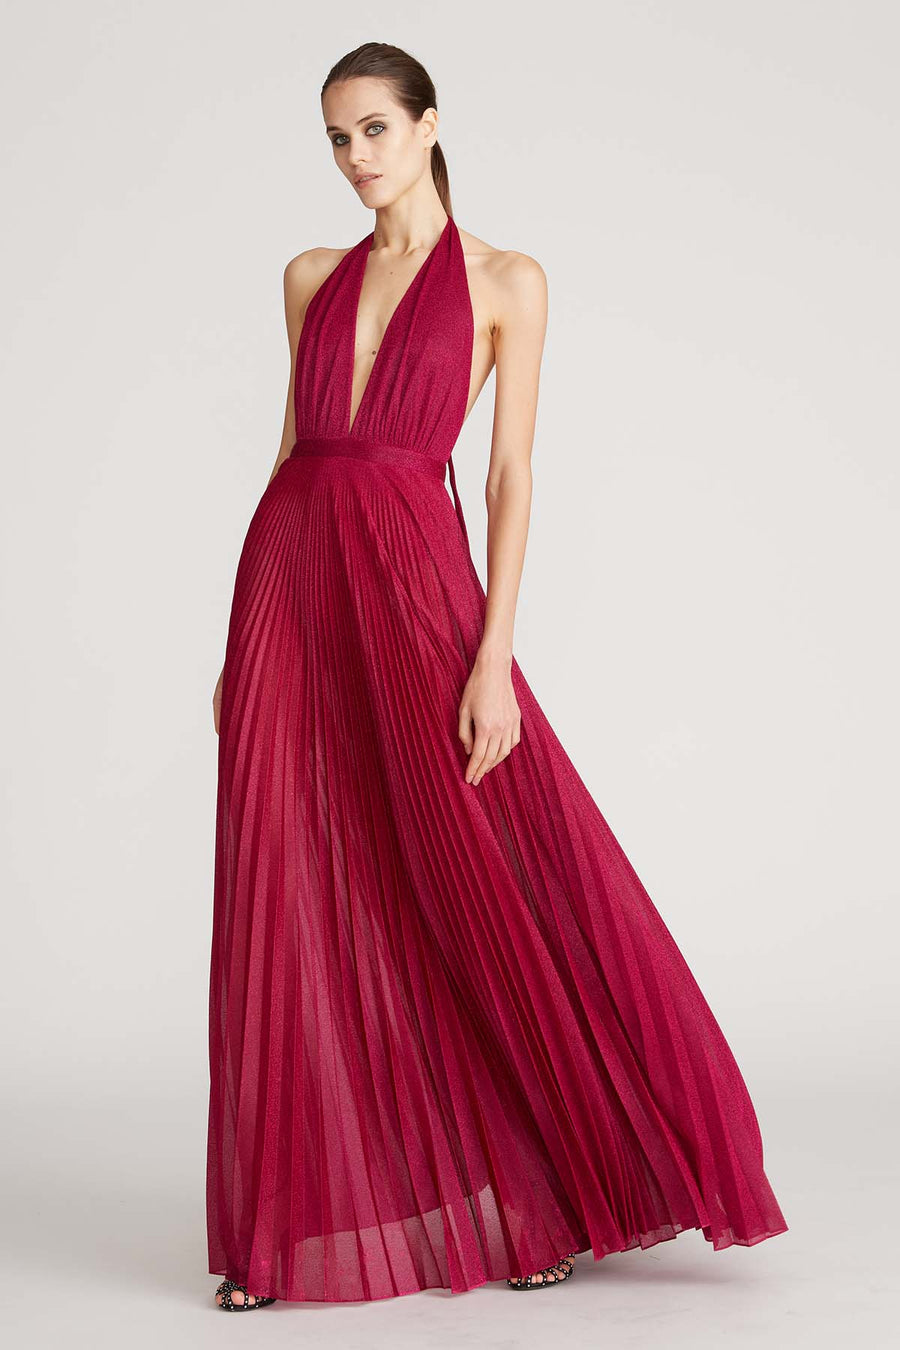 Chris Pleated Jersey Gown